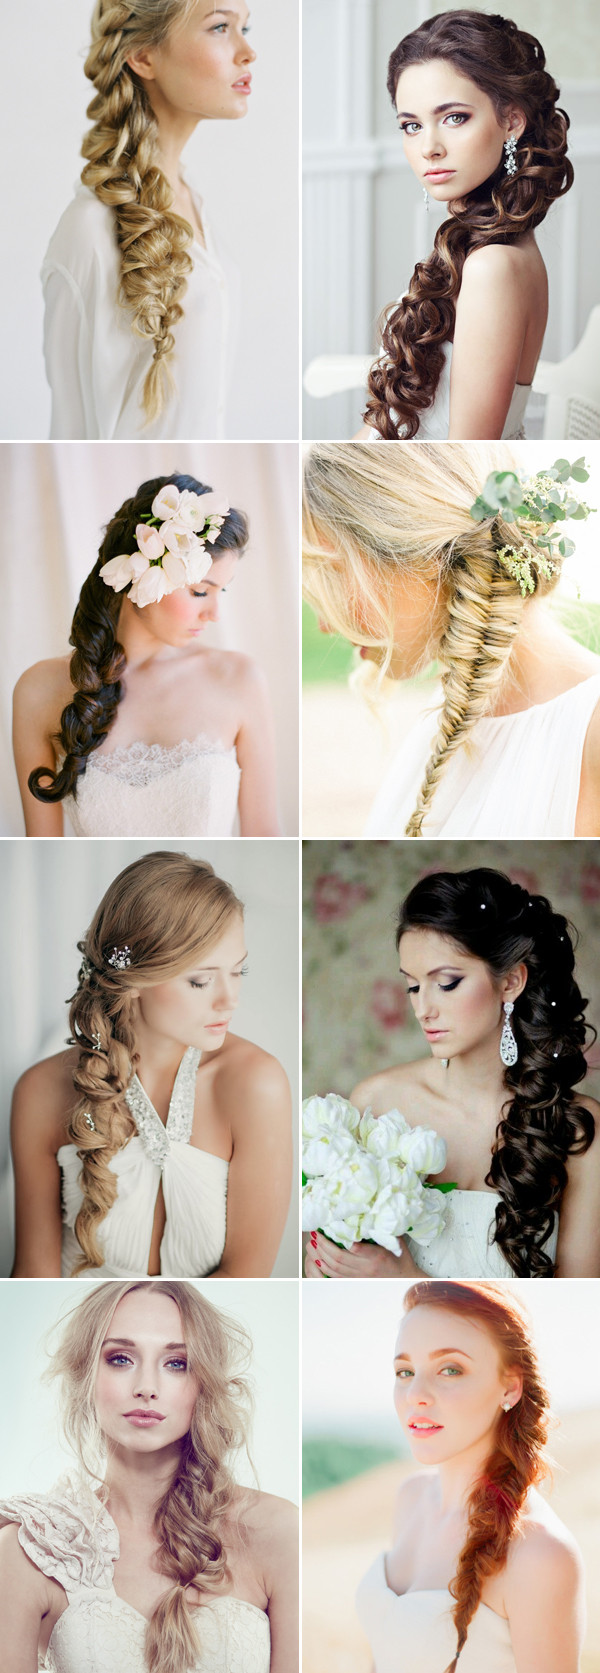 Wedding Hairstyles To The Side For Long Hair
 42 Steal Worthy Wedding Hairstyles for Long Hair